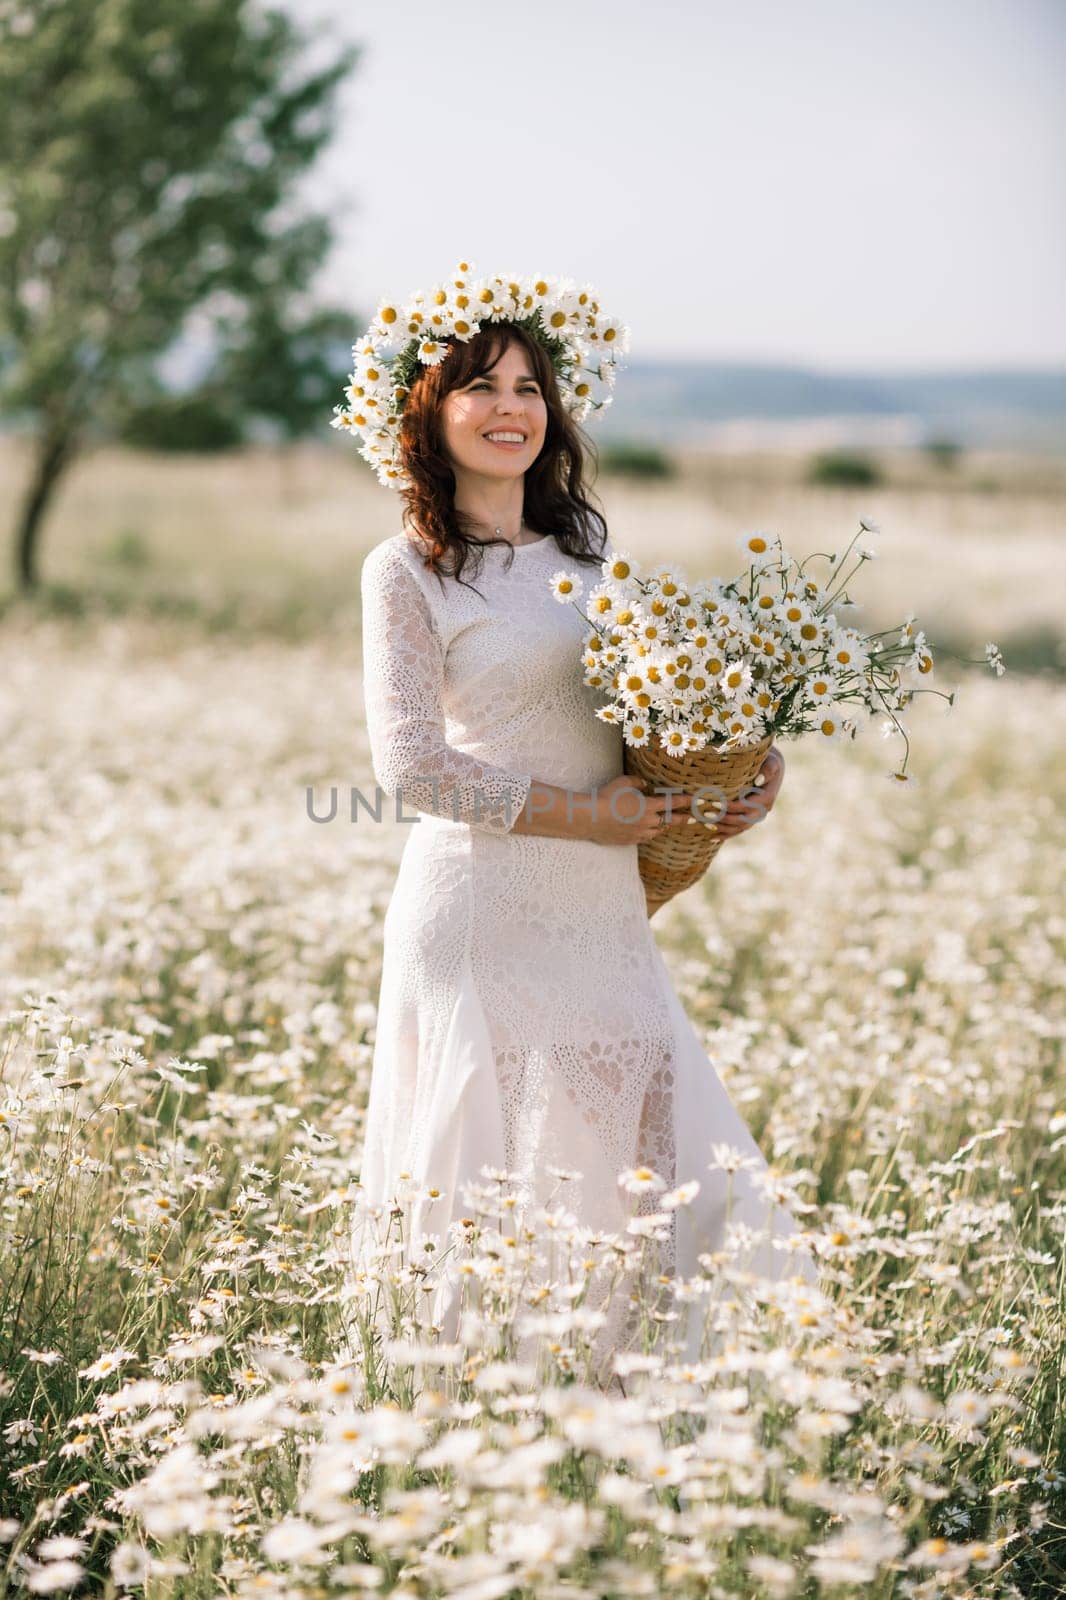 Happy woman in a field of daisies with a wreath of wildflowers on her head. woman in a white dress in a field of white flowers. Charming woman with a bouquet of daisies, tender summer photo.